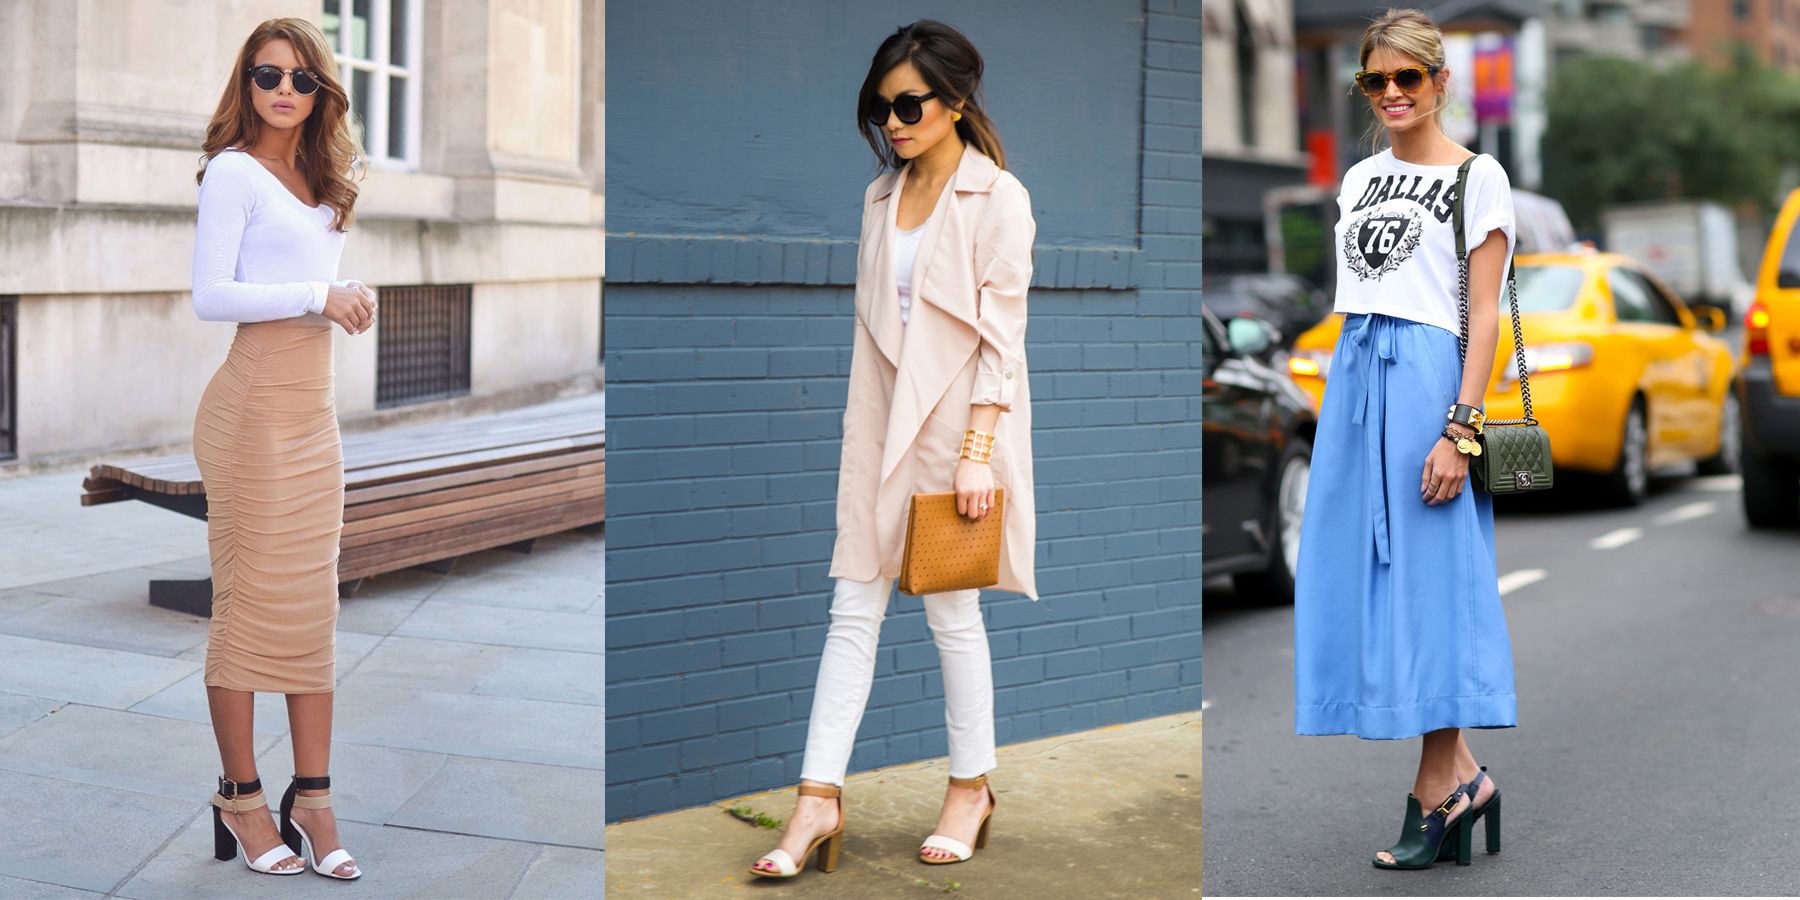 These 5 Tricks Will Make You Super Comfortable and Comfortable Wearing Heels All Day!